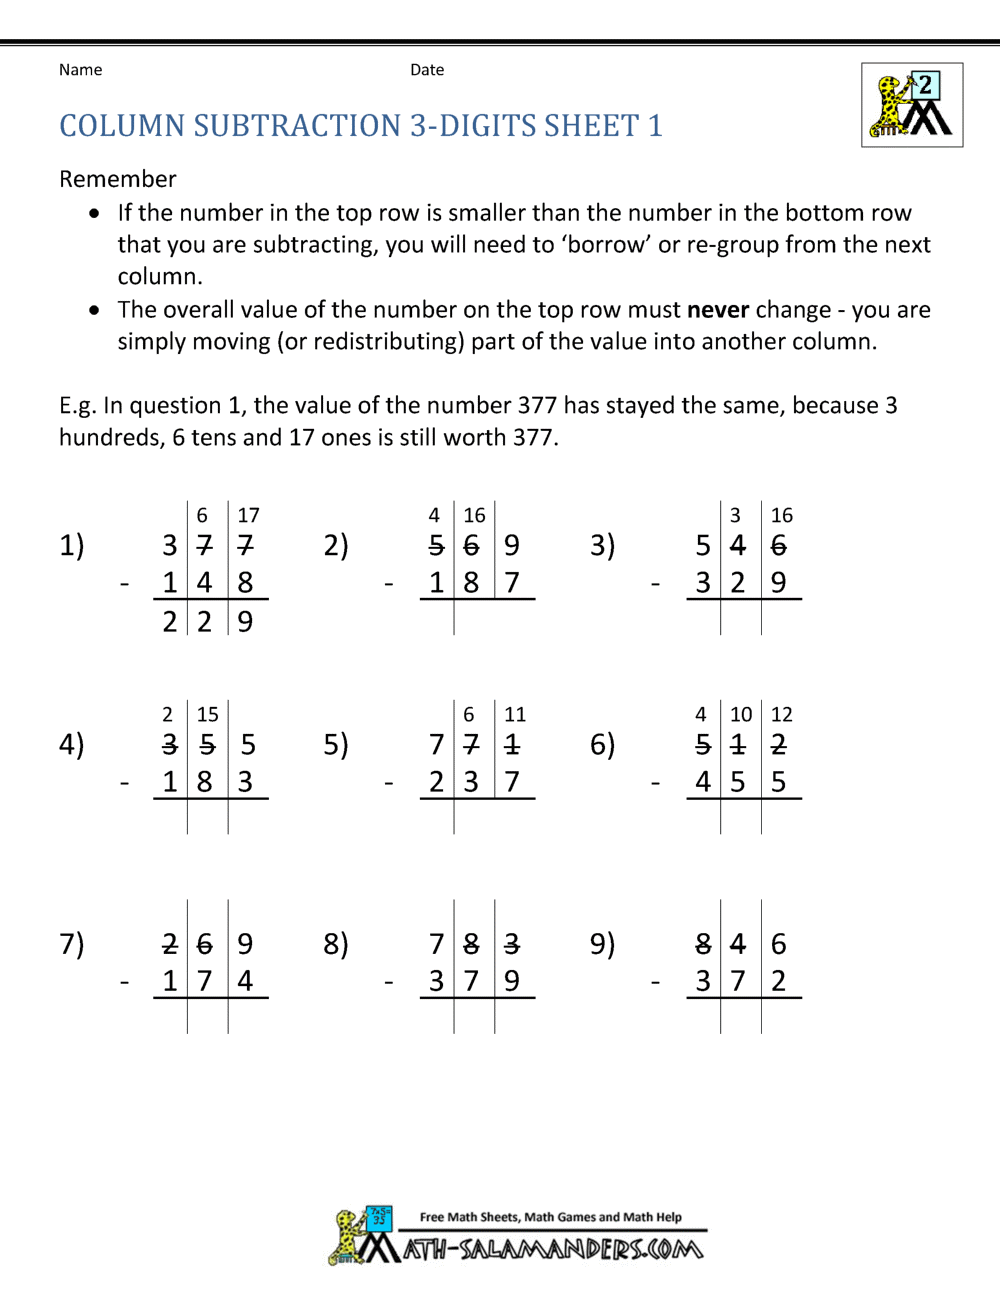 3-digit-addition-regrouping-worksheets